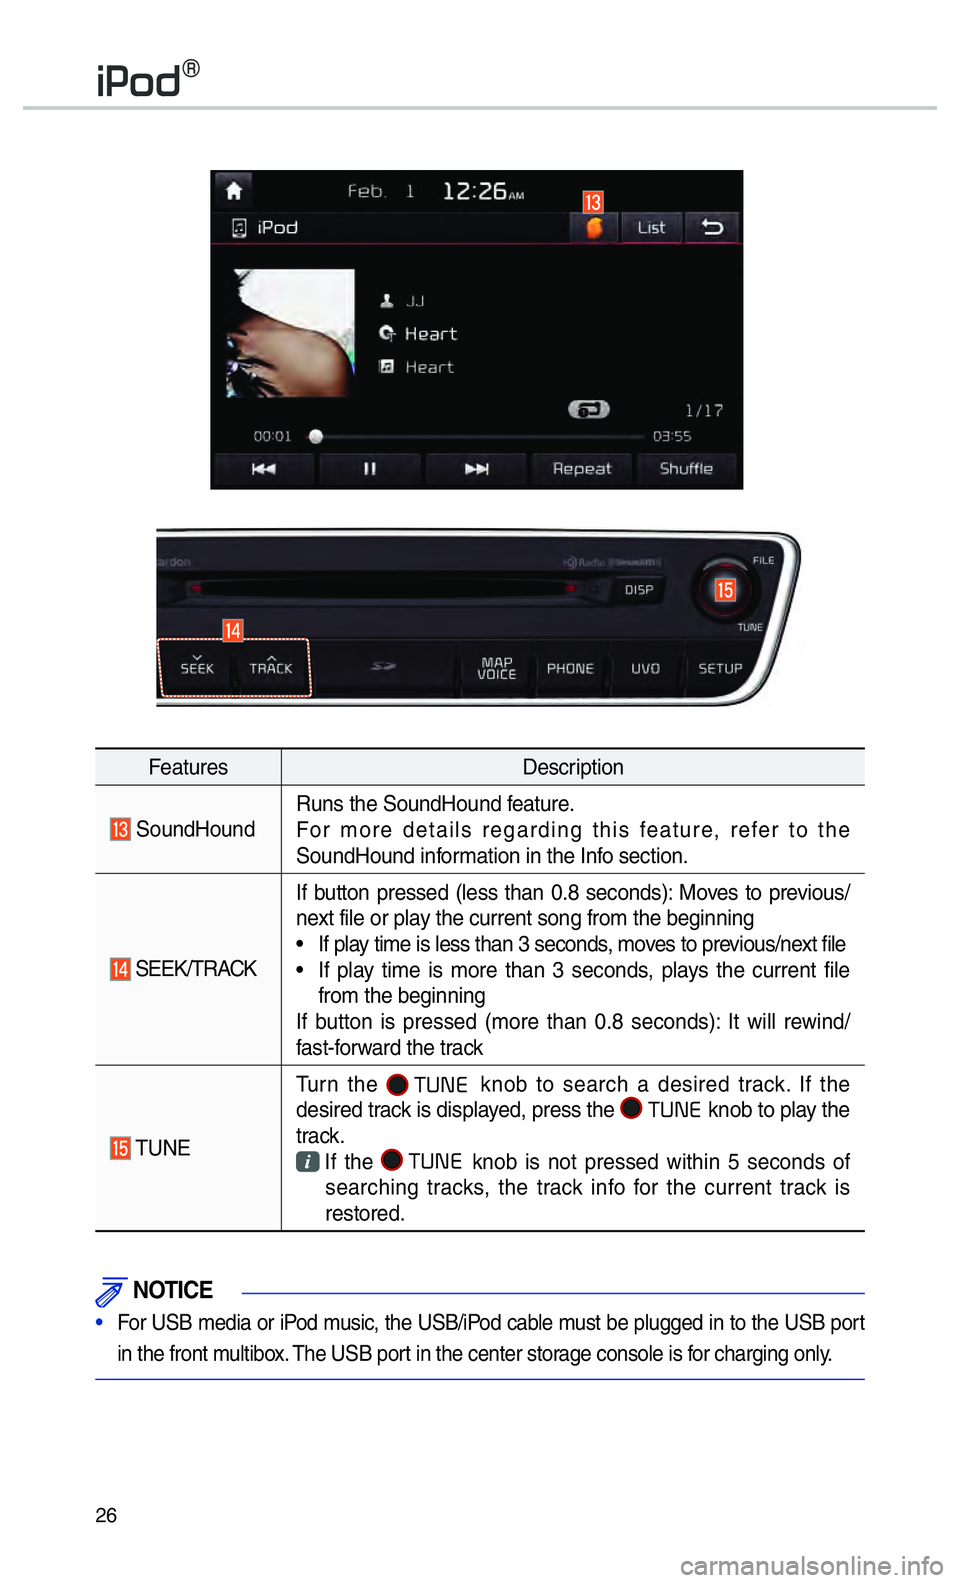 KIA CADENZA 2017  Navigation System Quick Reference Guide 26
FeaturesDescription
 SoundHoundRuns the SoundHound feature.
For more details regarding this feature, refer to the 
SoundHound information in the Info section.
 SEEK/TRACKIf button pressed (less tha